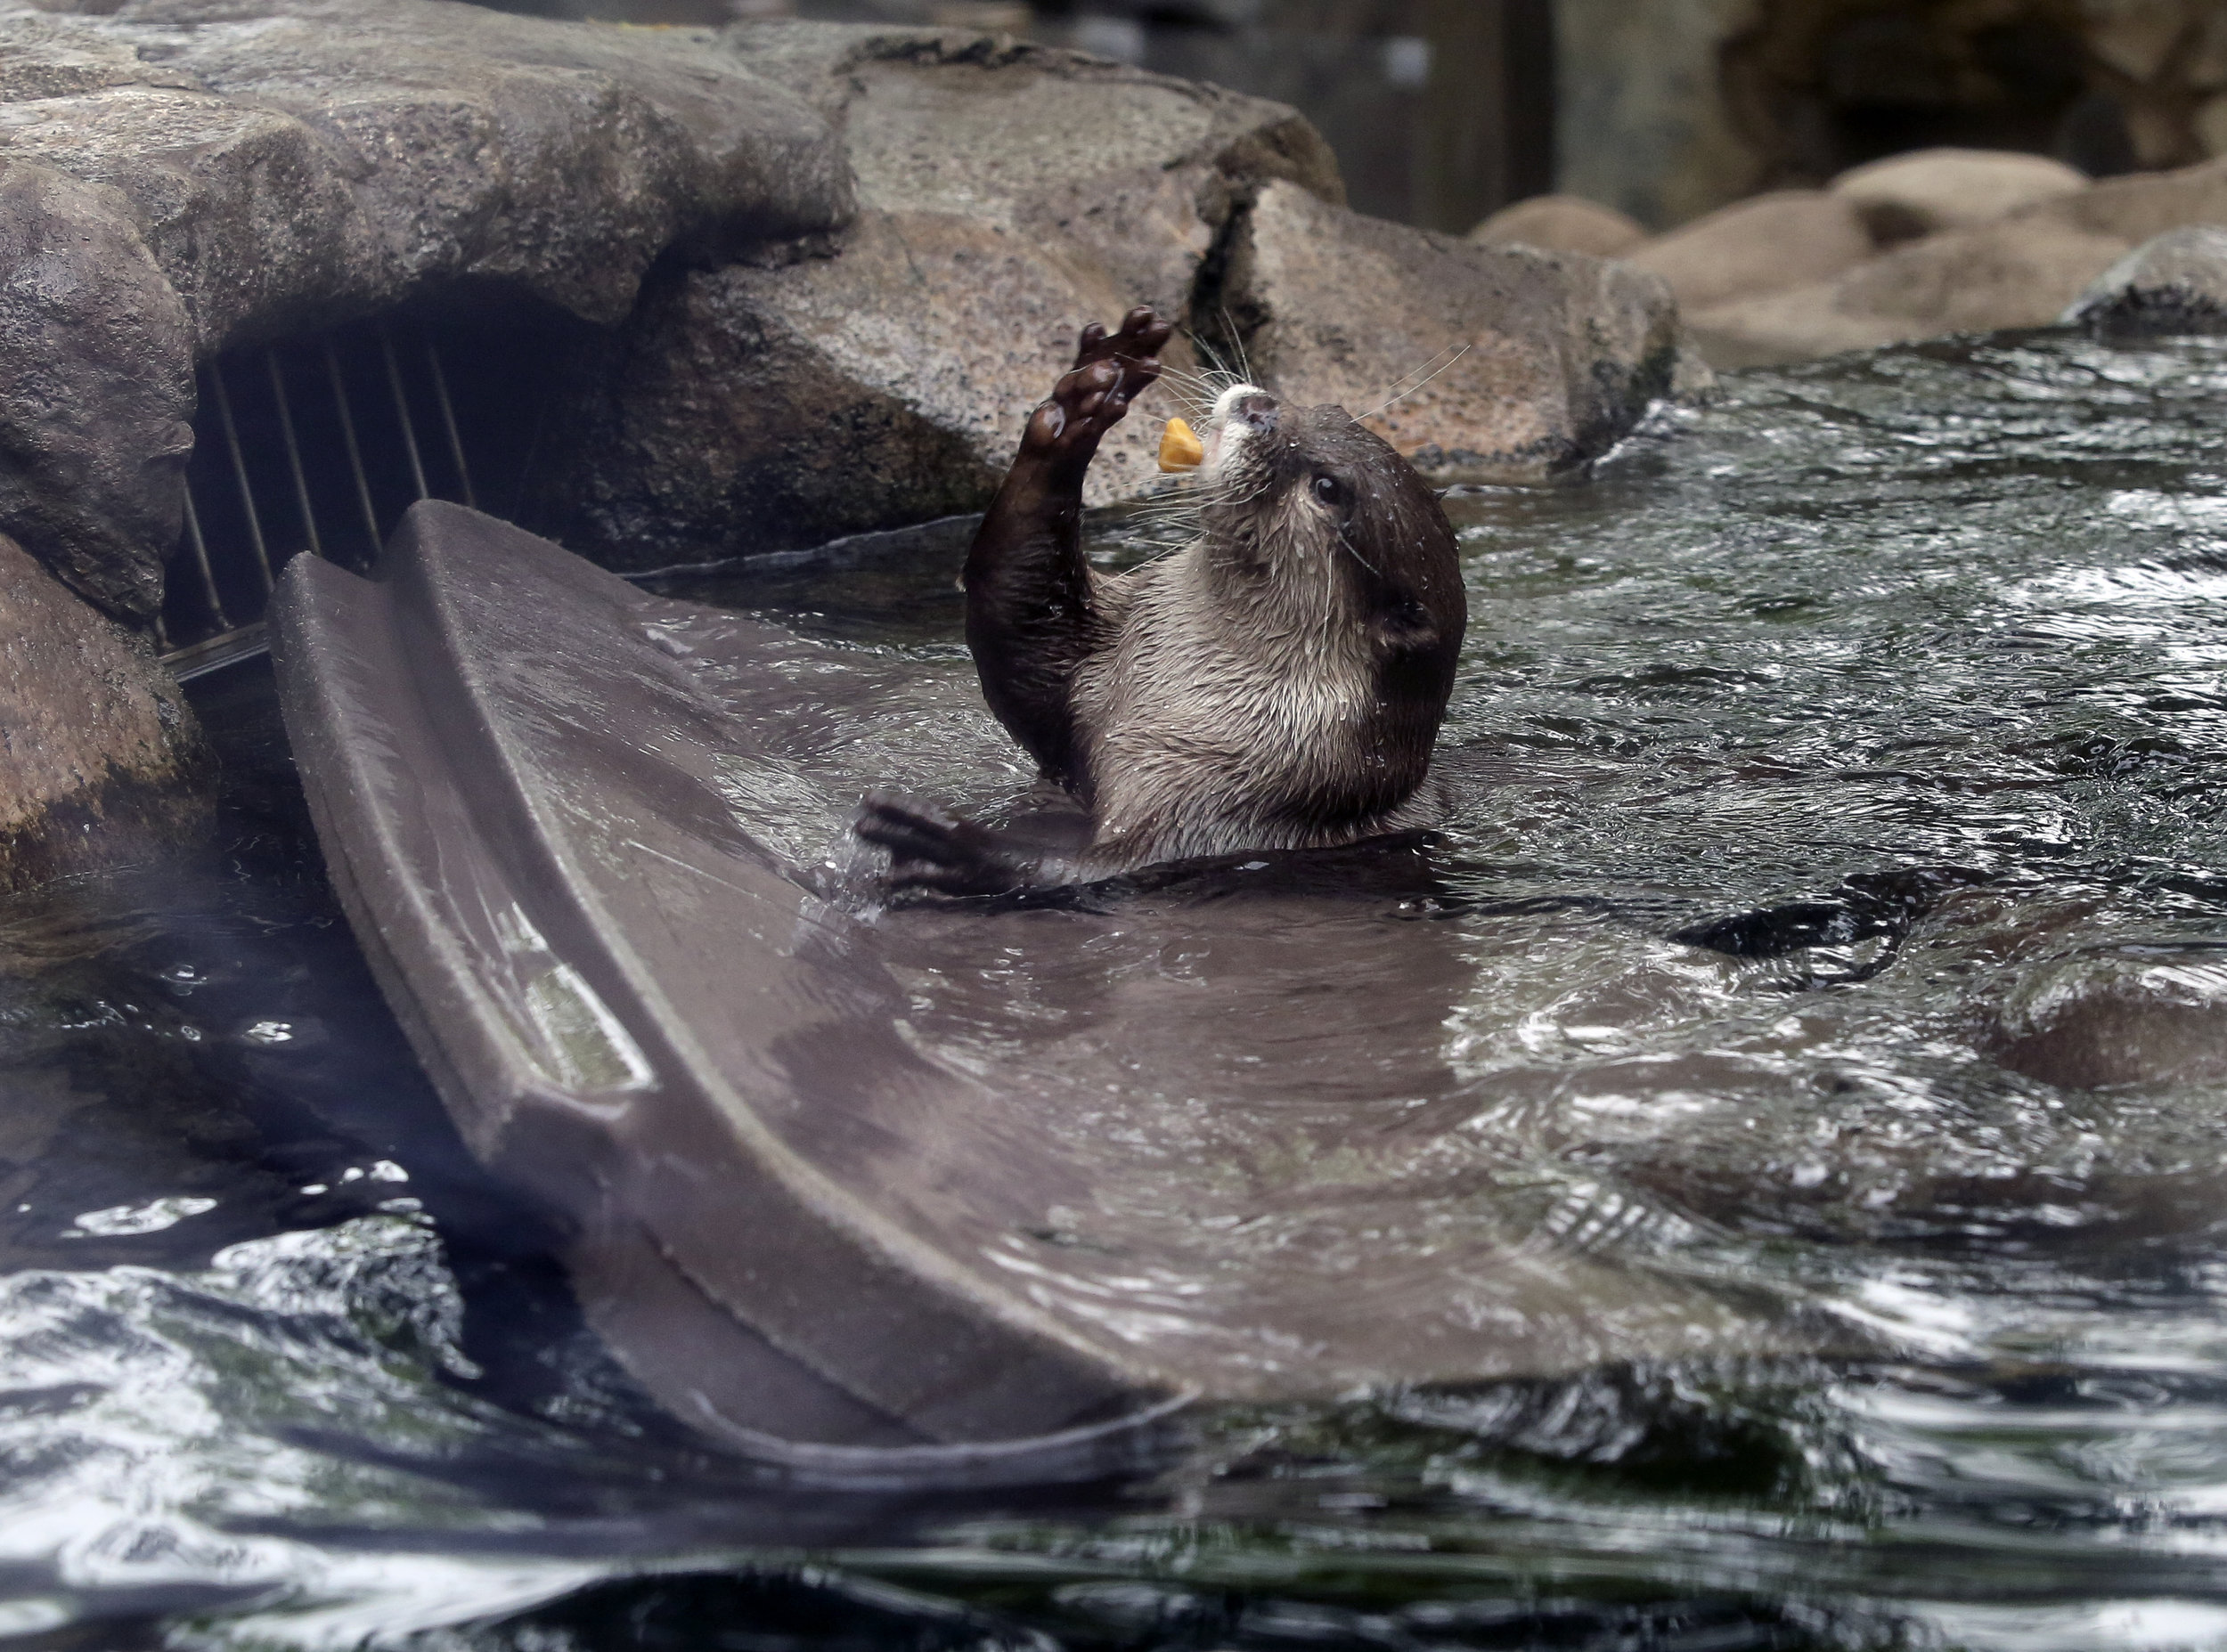 Otter, Open Your Mouth to Catch the Treat!